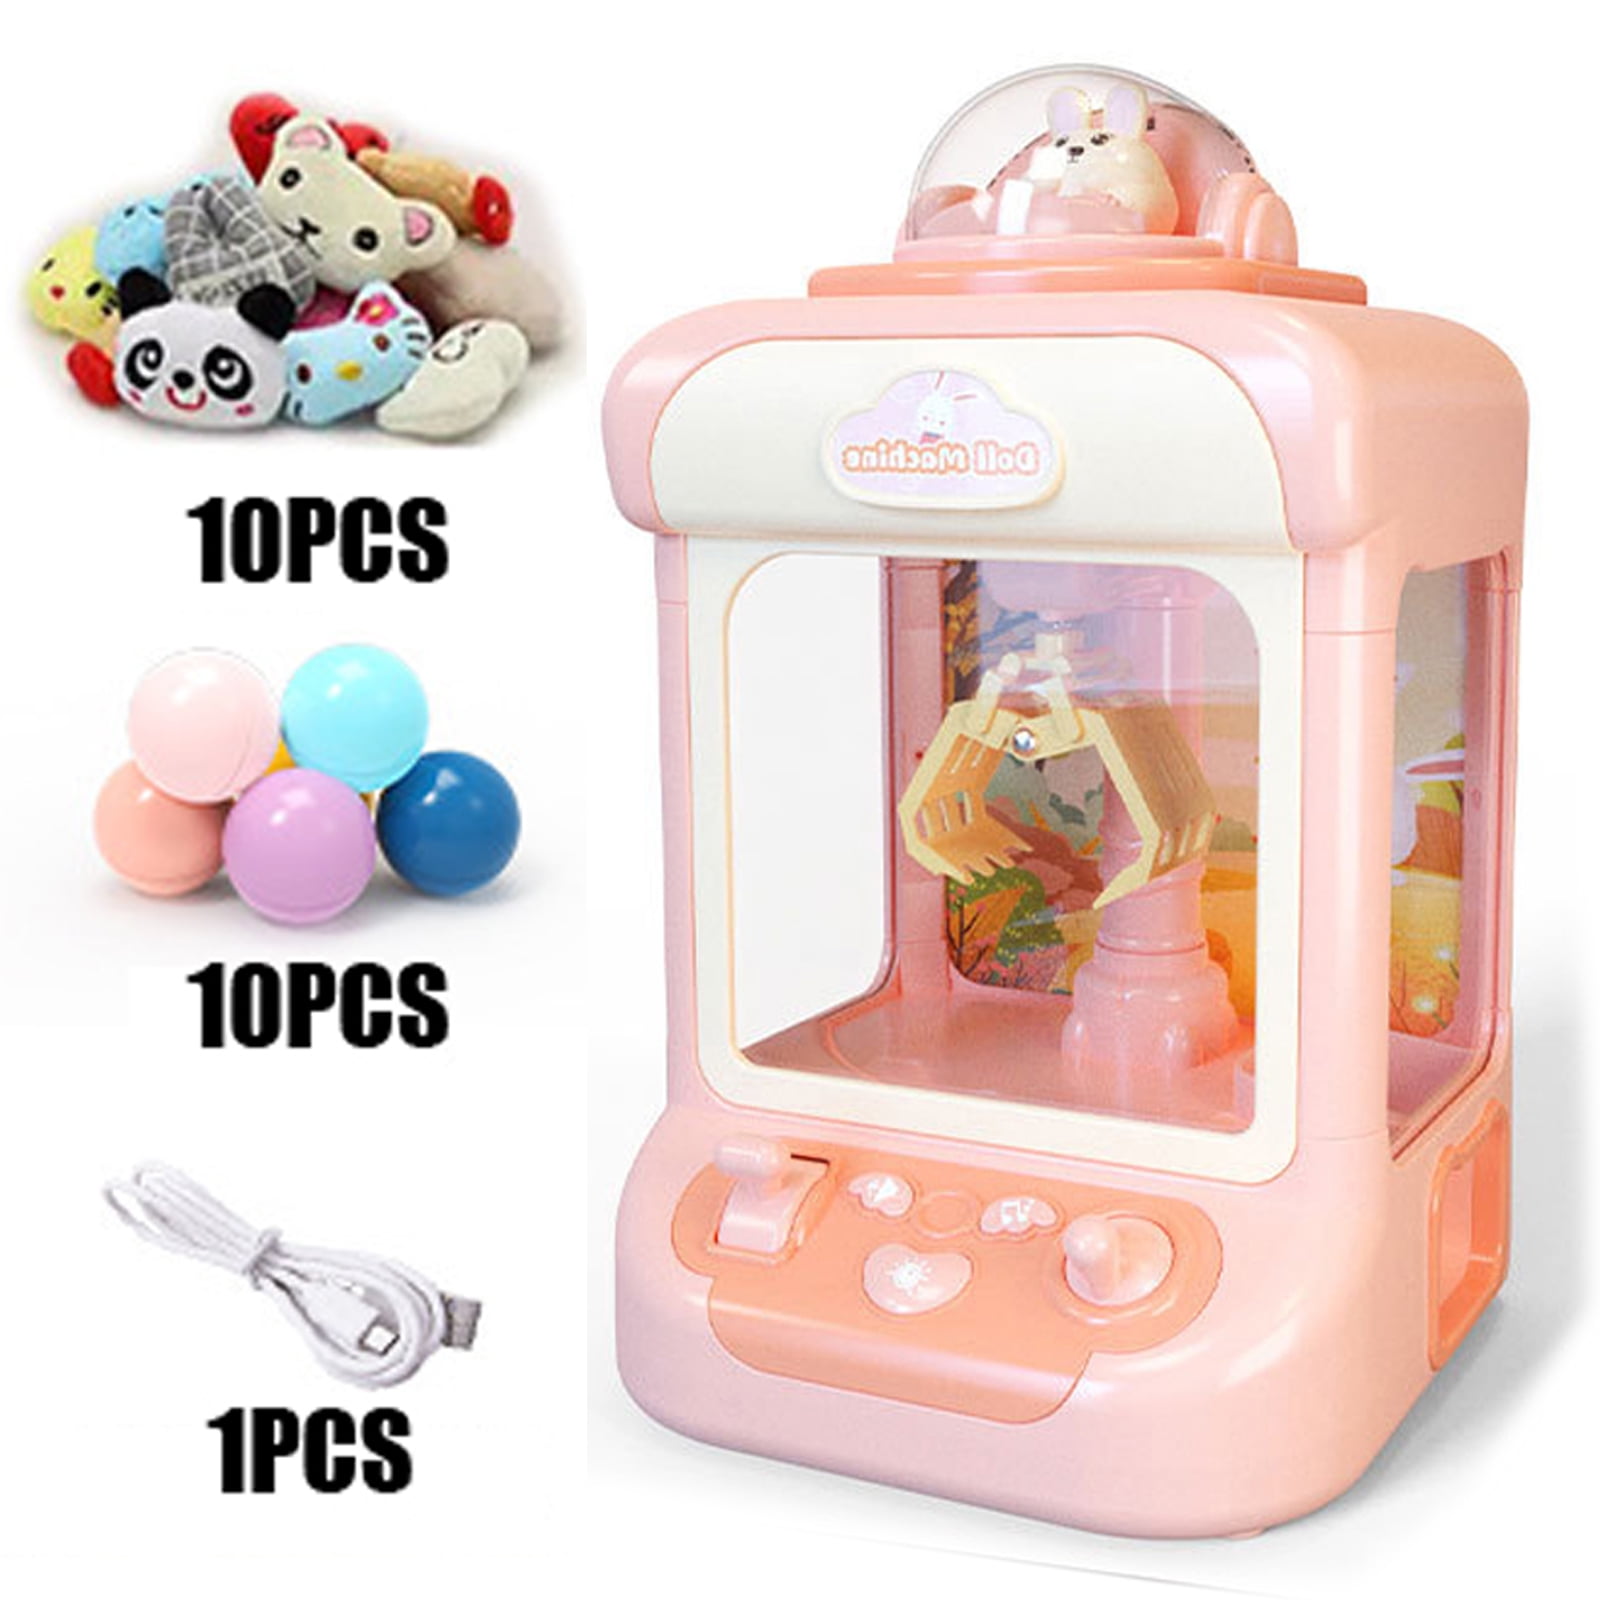  YOTOY Mini Claw Machine Toys for Kids Age 3 4 5 6 7 8 Years Old,  Kids Claw Machine, Toy Claw Machine for Kids, Girls Toys Age 6-8, Toys for  Girls